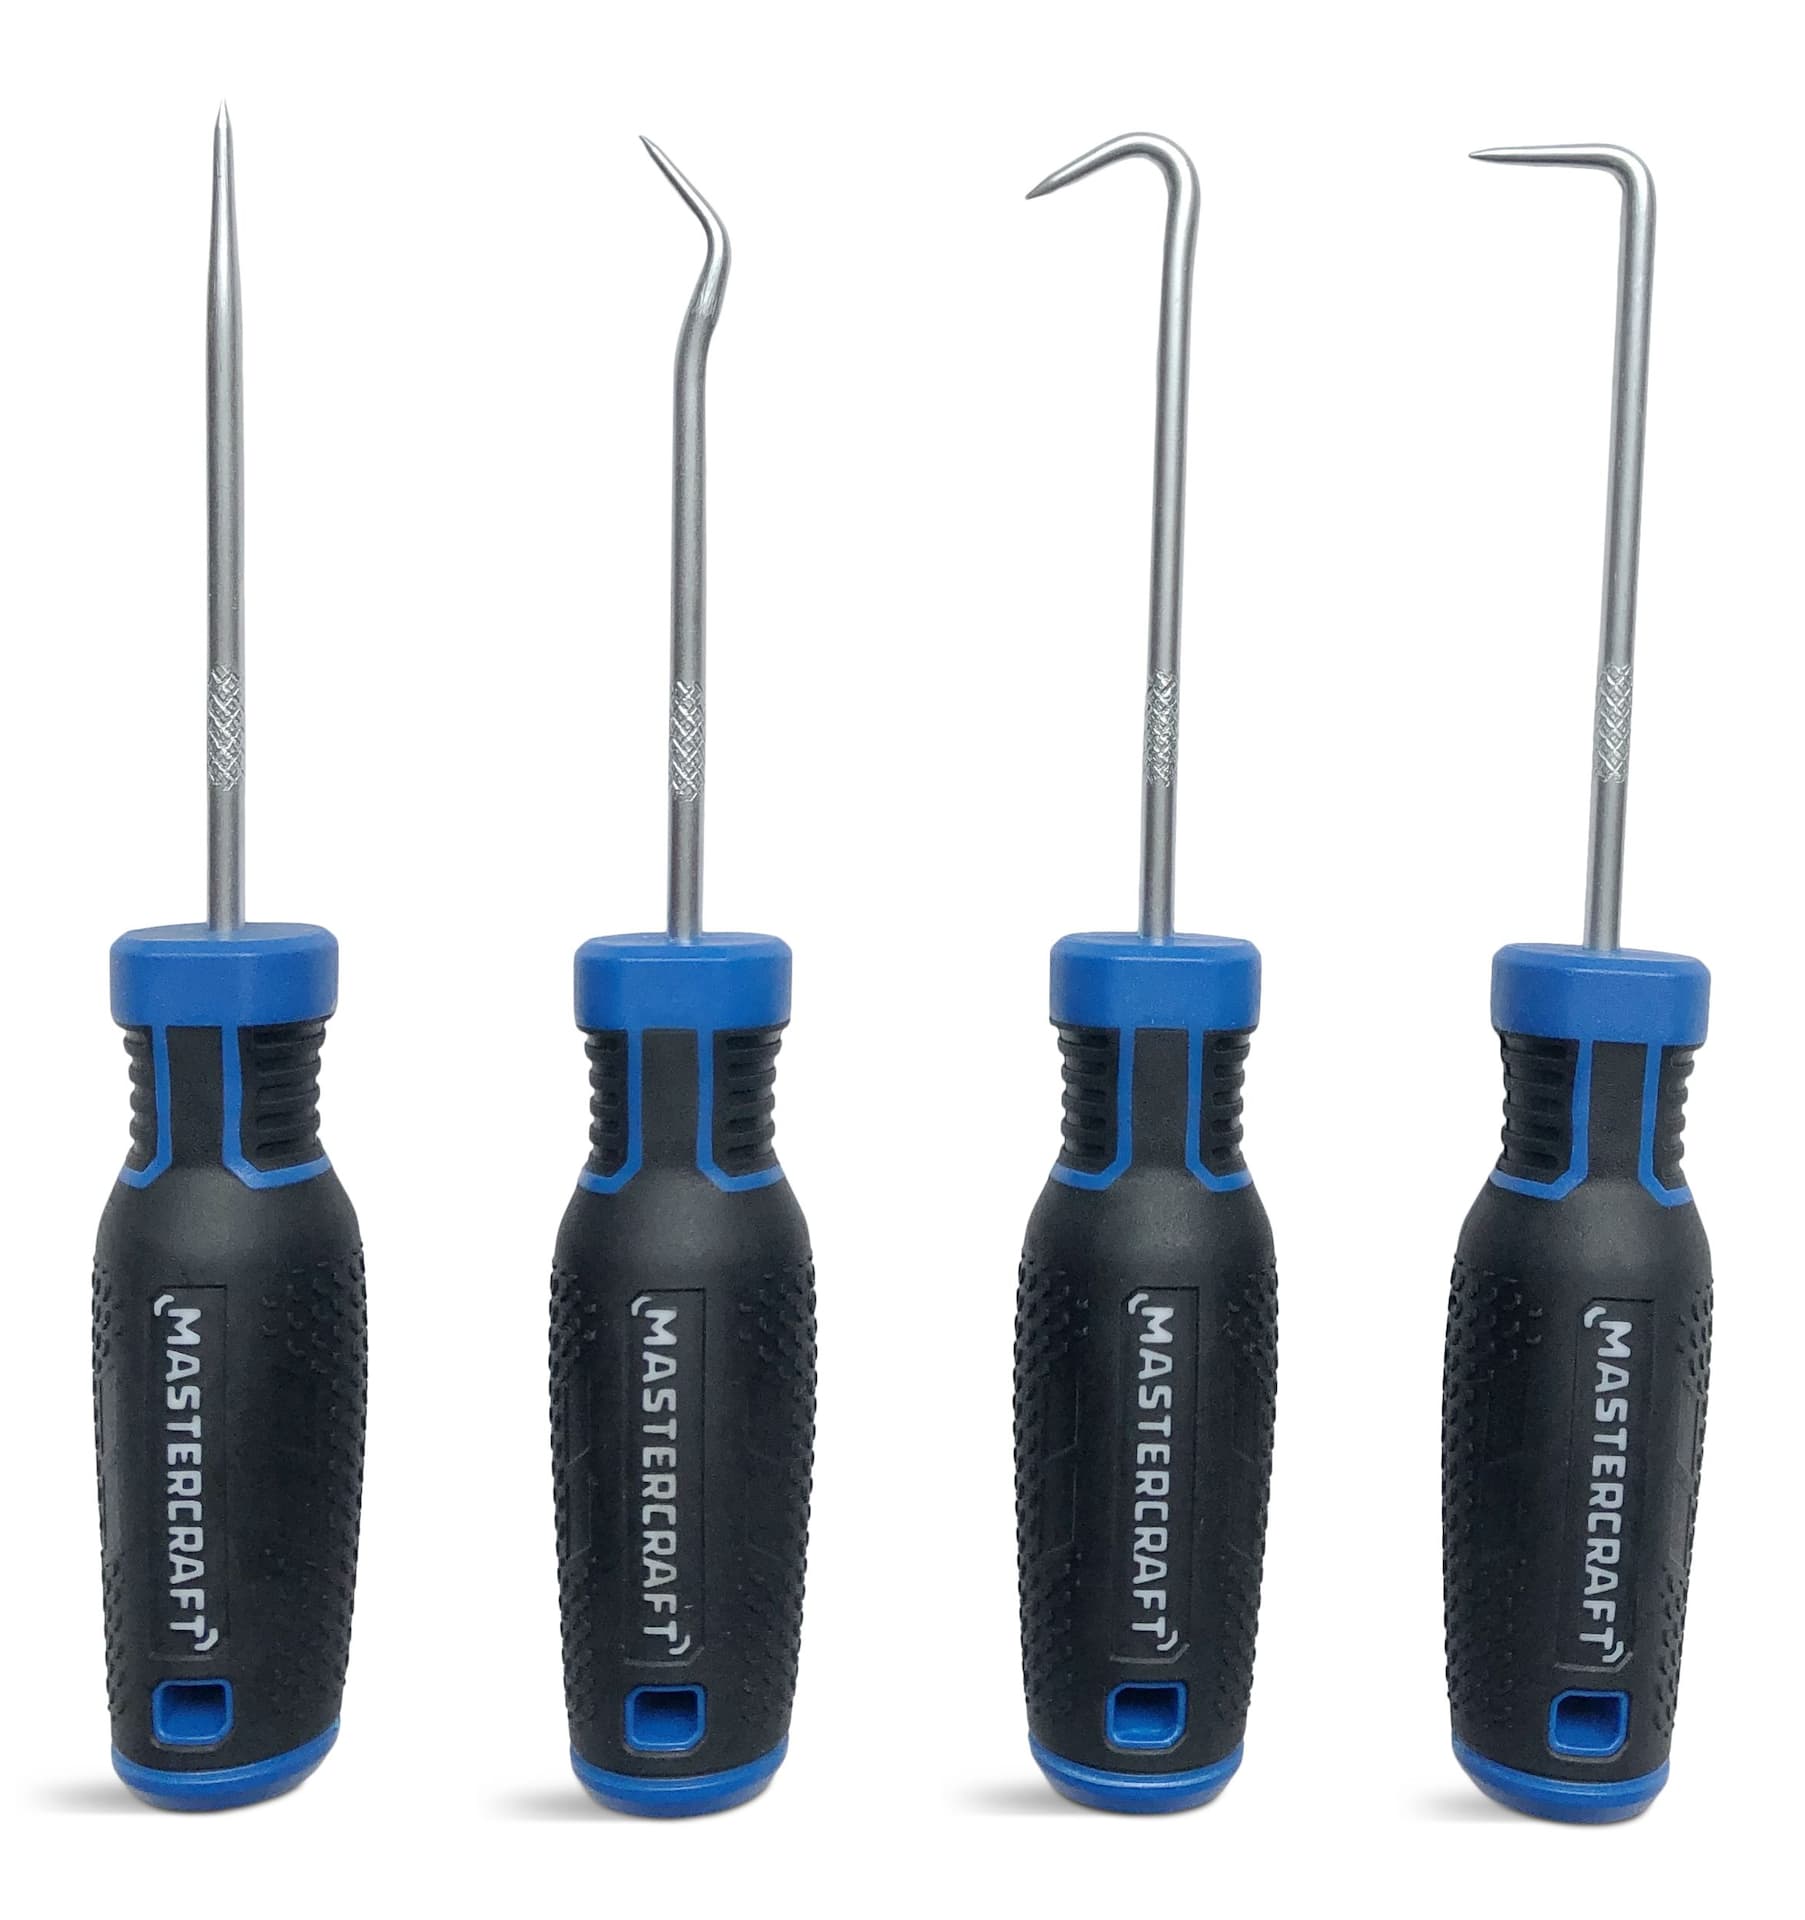 Ccdes Precise Hook Puller Remover,4pcs Pick And Hook Set Steel Handheld Screwdrivers Oil Seal Gasket Precise Removal Tools,oil Seal Screwdrivers